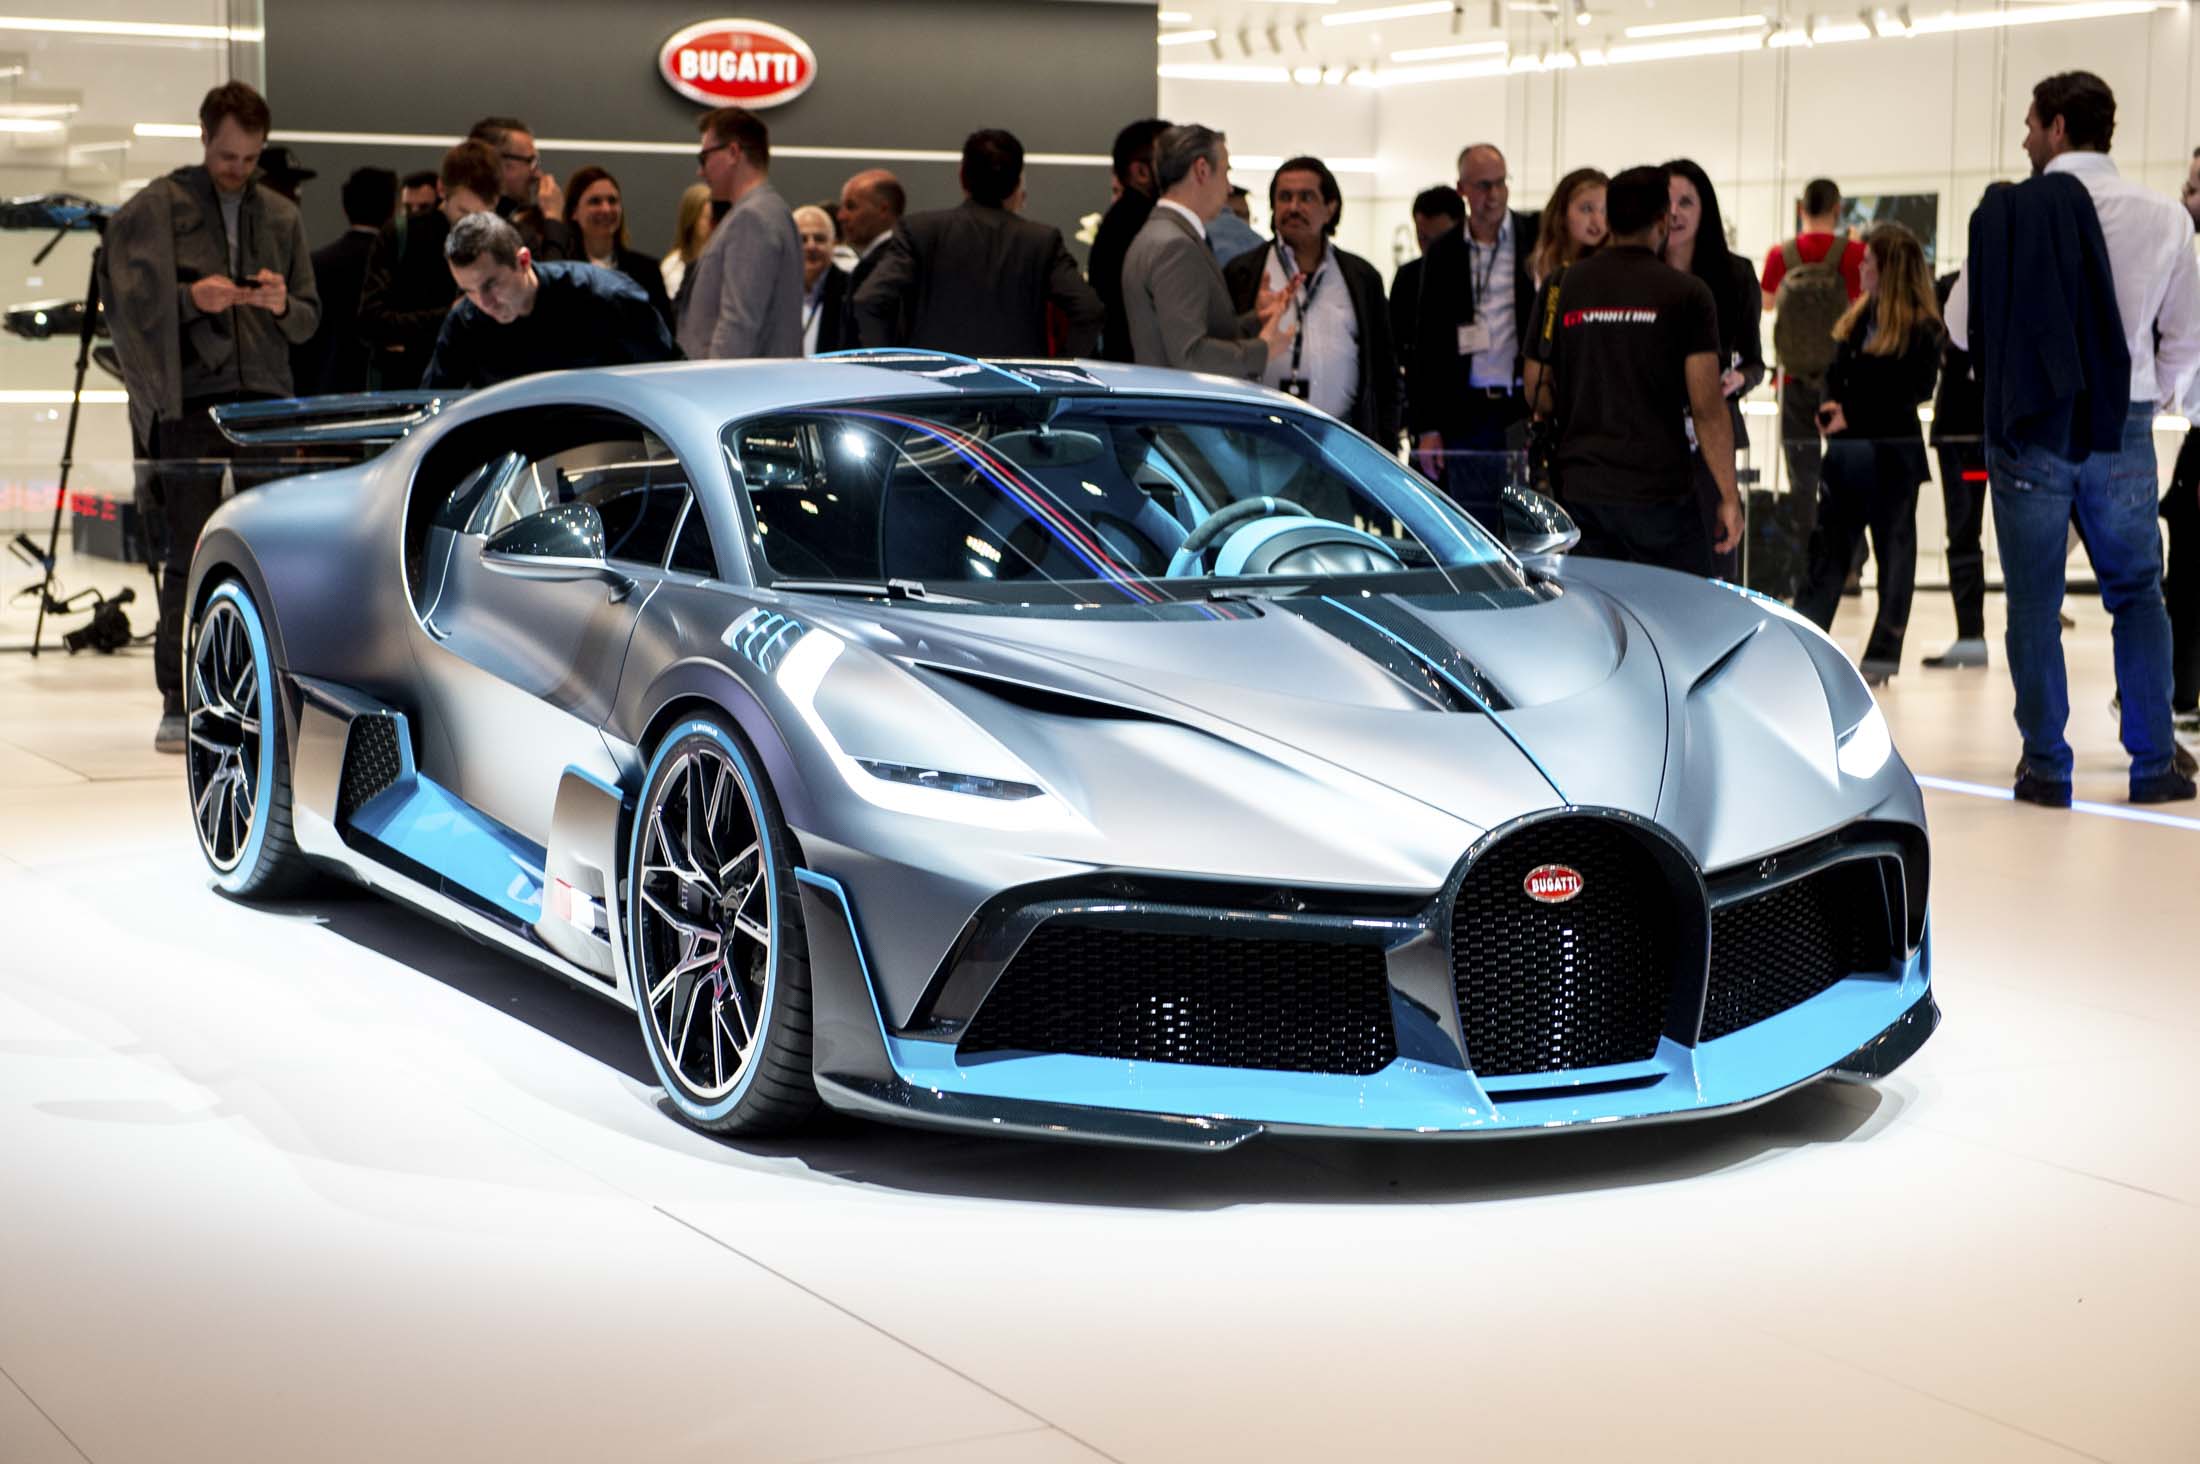 Bugatti’s ‘Sky Is the Limit’ Strategy of $13 Million, One-Off Supercars 1